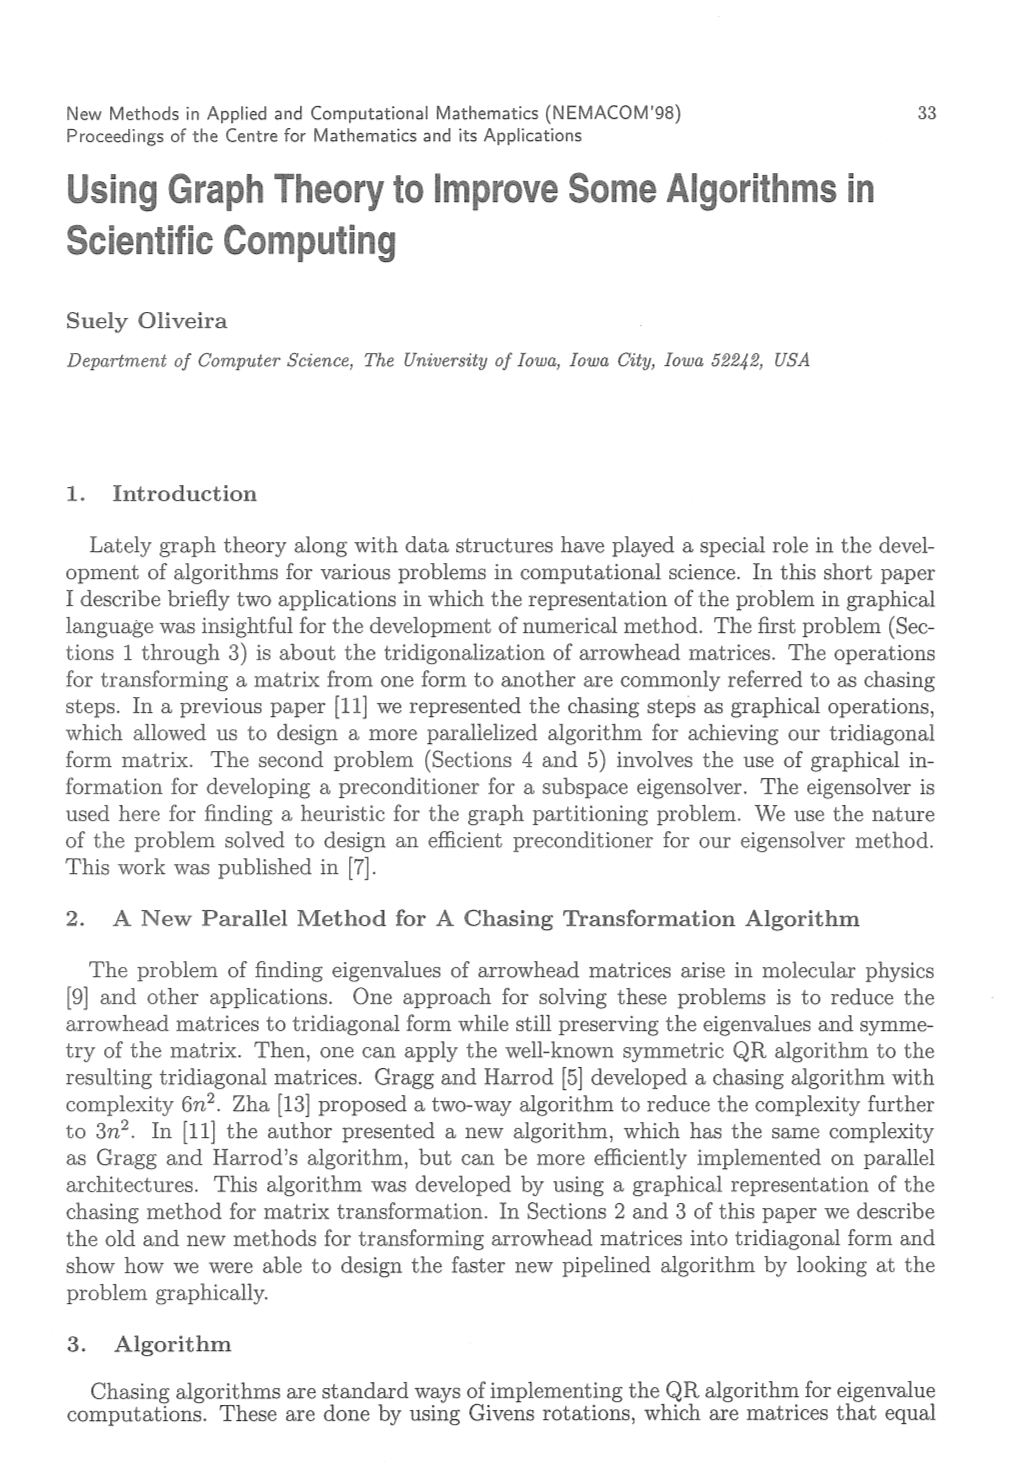 Using Graph Theory to Improve Some Algorithms in Scientific Computing